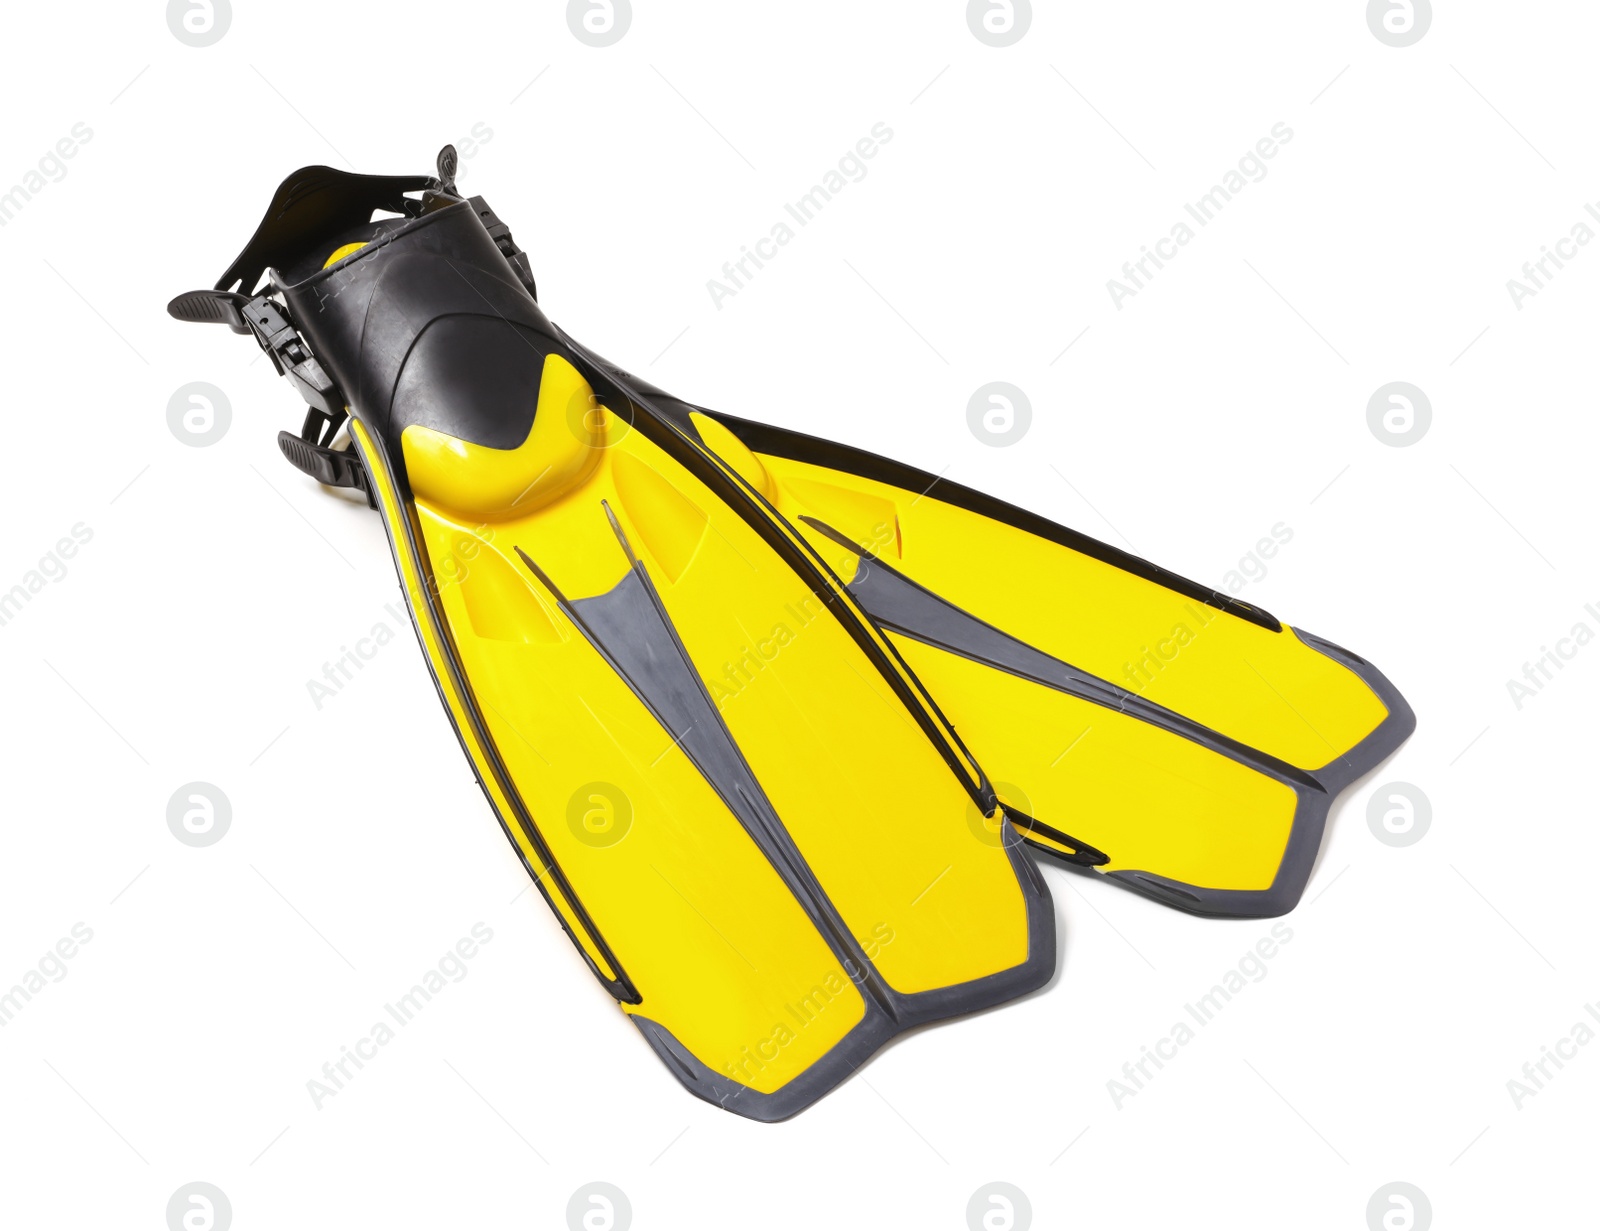 Photo of Pair of yellow flippers on white background